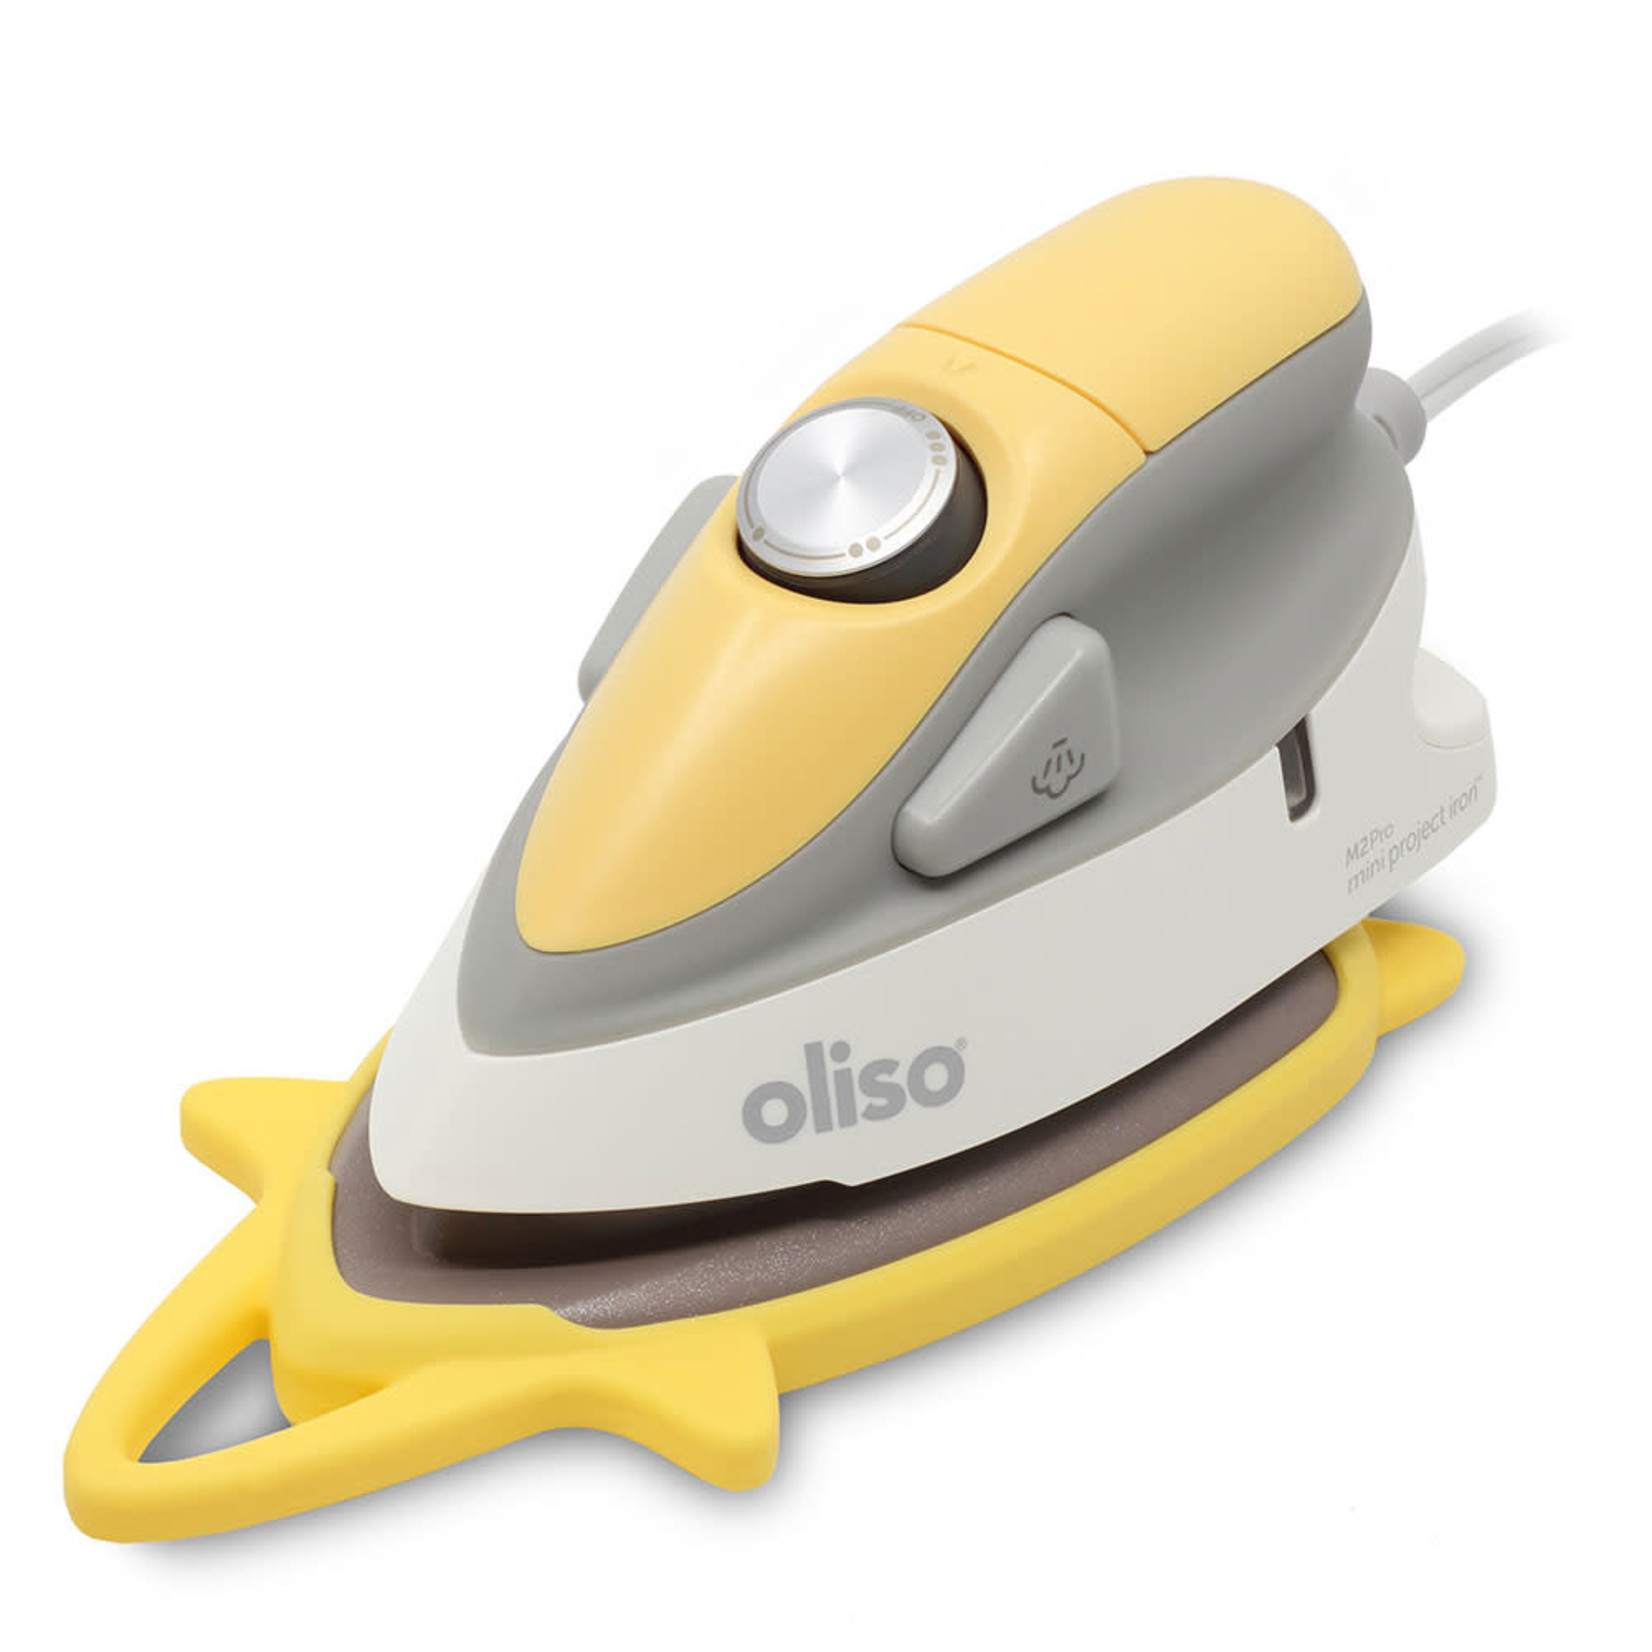 Oliso OLISO M2Pro Mini Project Iron with Solemate